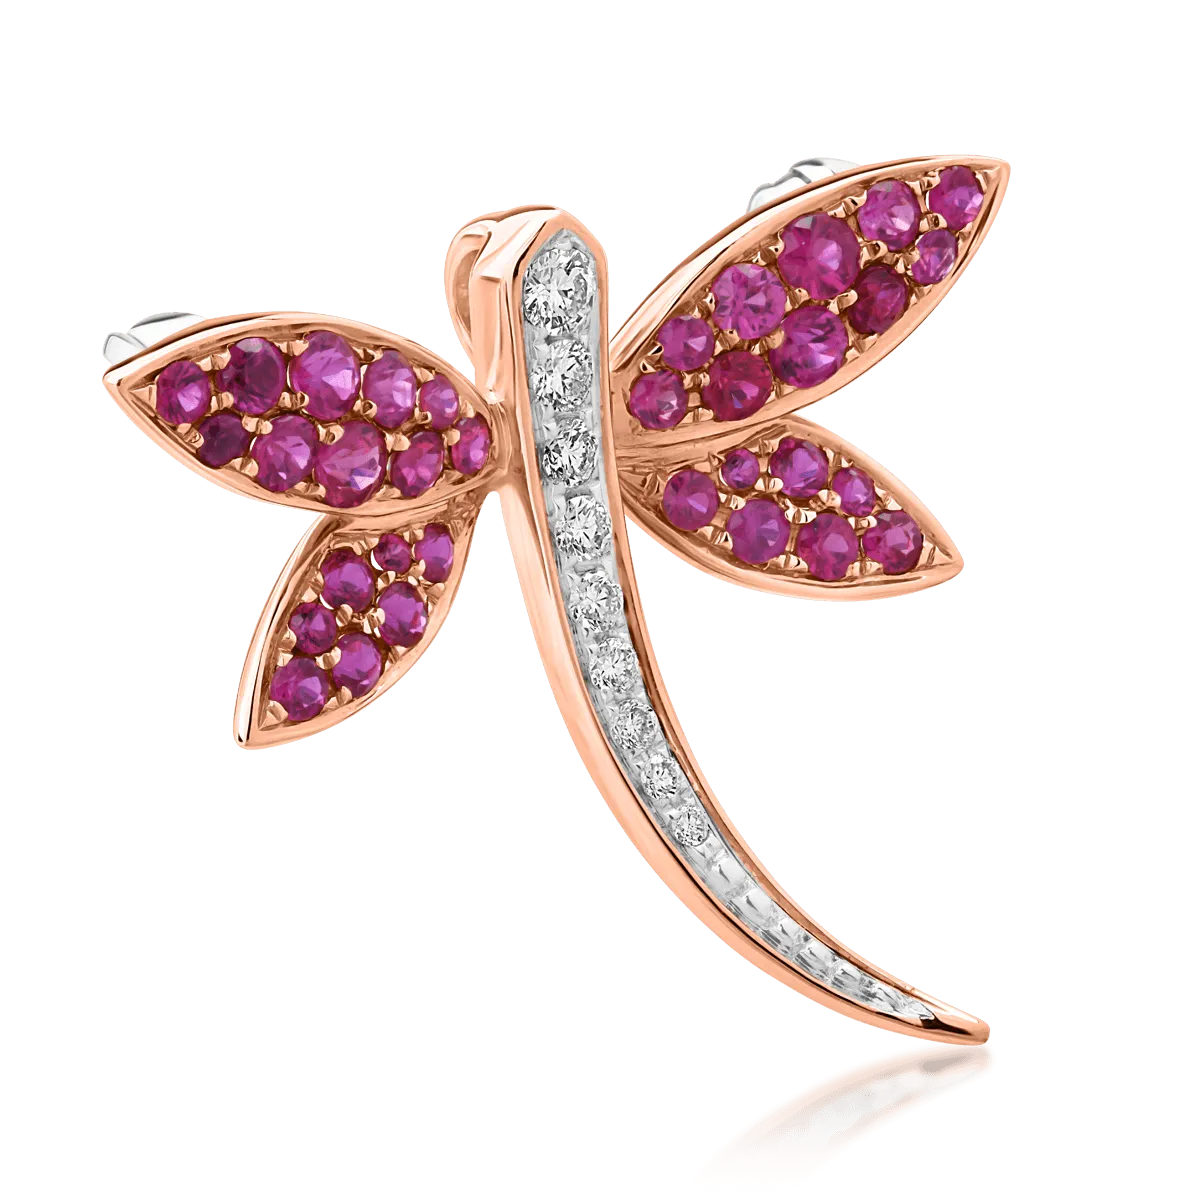 18K white-rose gold brooch with 0.67ct rubies and 0.11ct diamonds